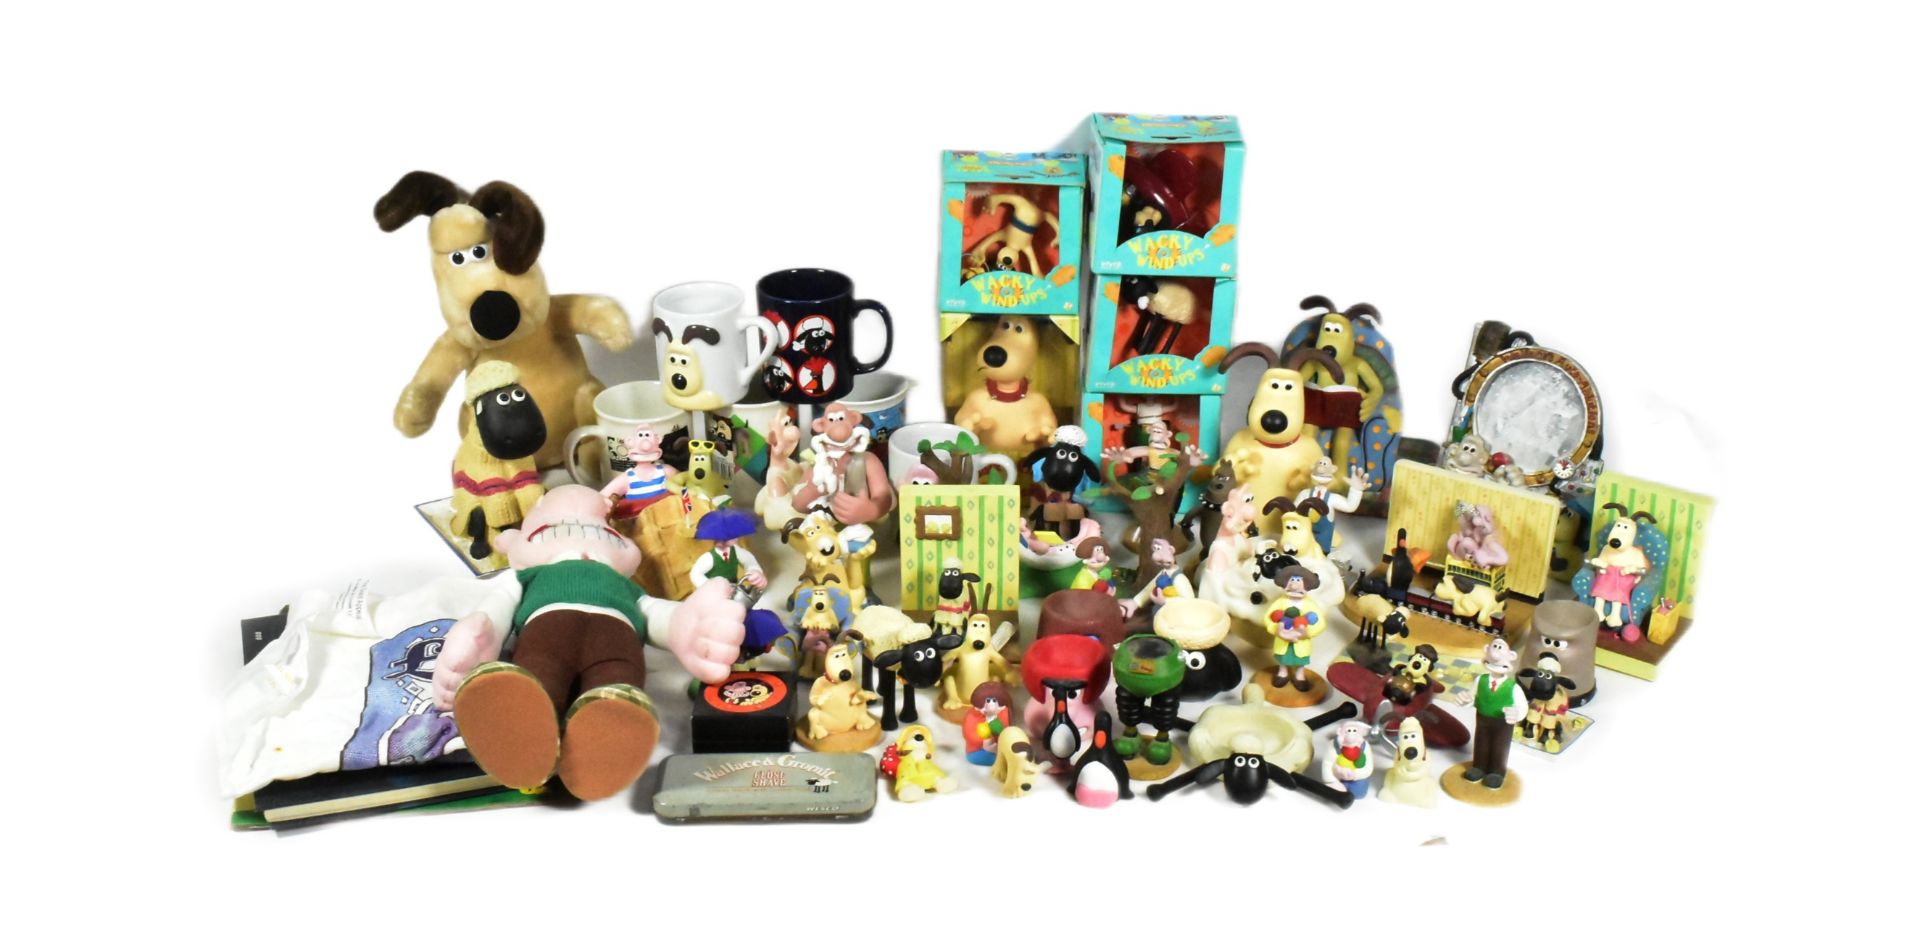 WALLACE & GROMIT - COLLECTION OF MEMORABILIA